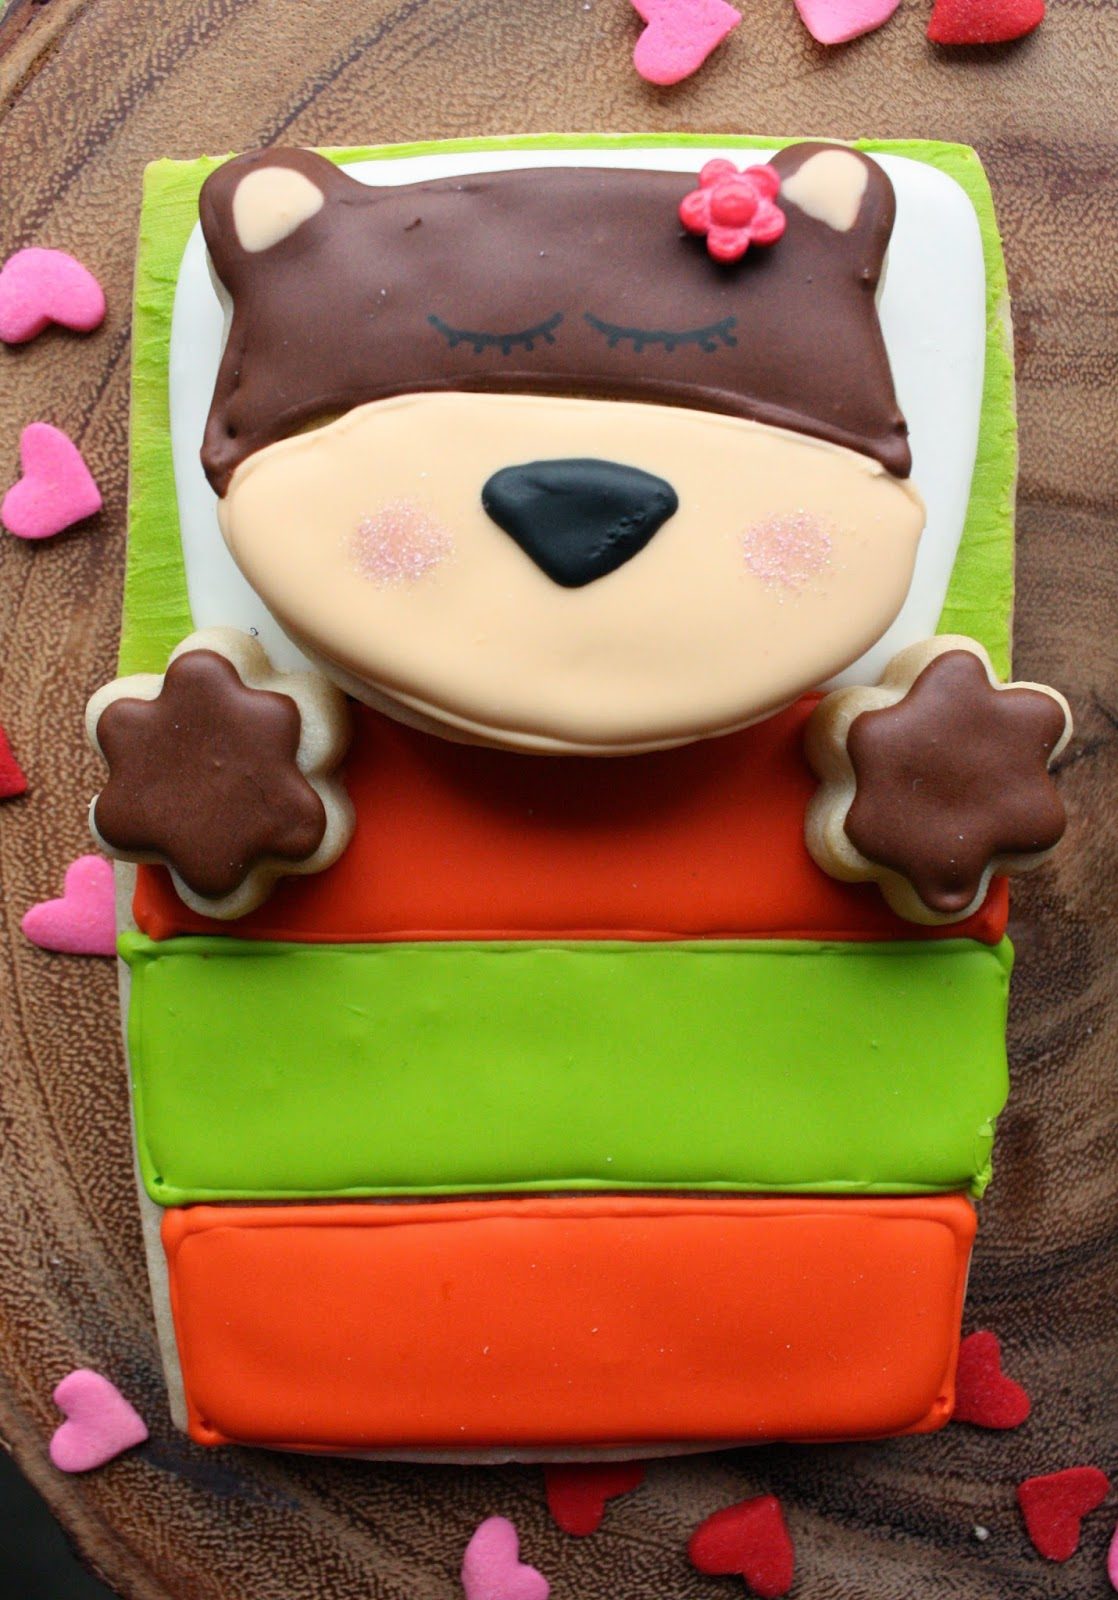 Grizzly Campout Cookies and 100 Animal Cookies {by Lisa Snyder} Book Giveaway!, Lay The Table